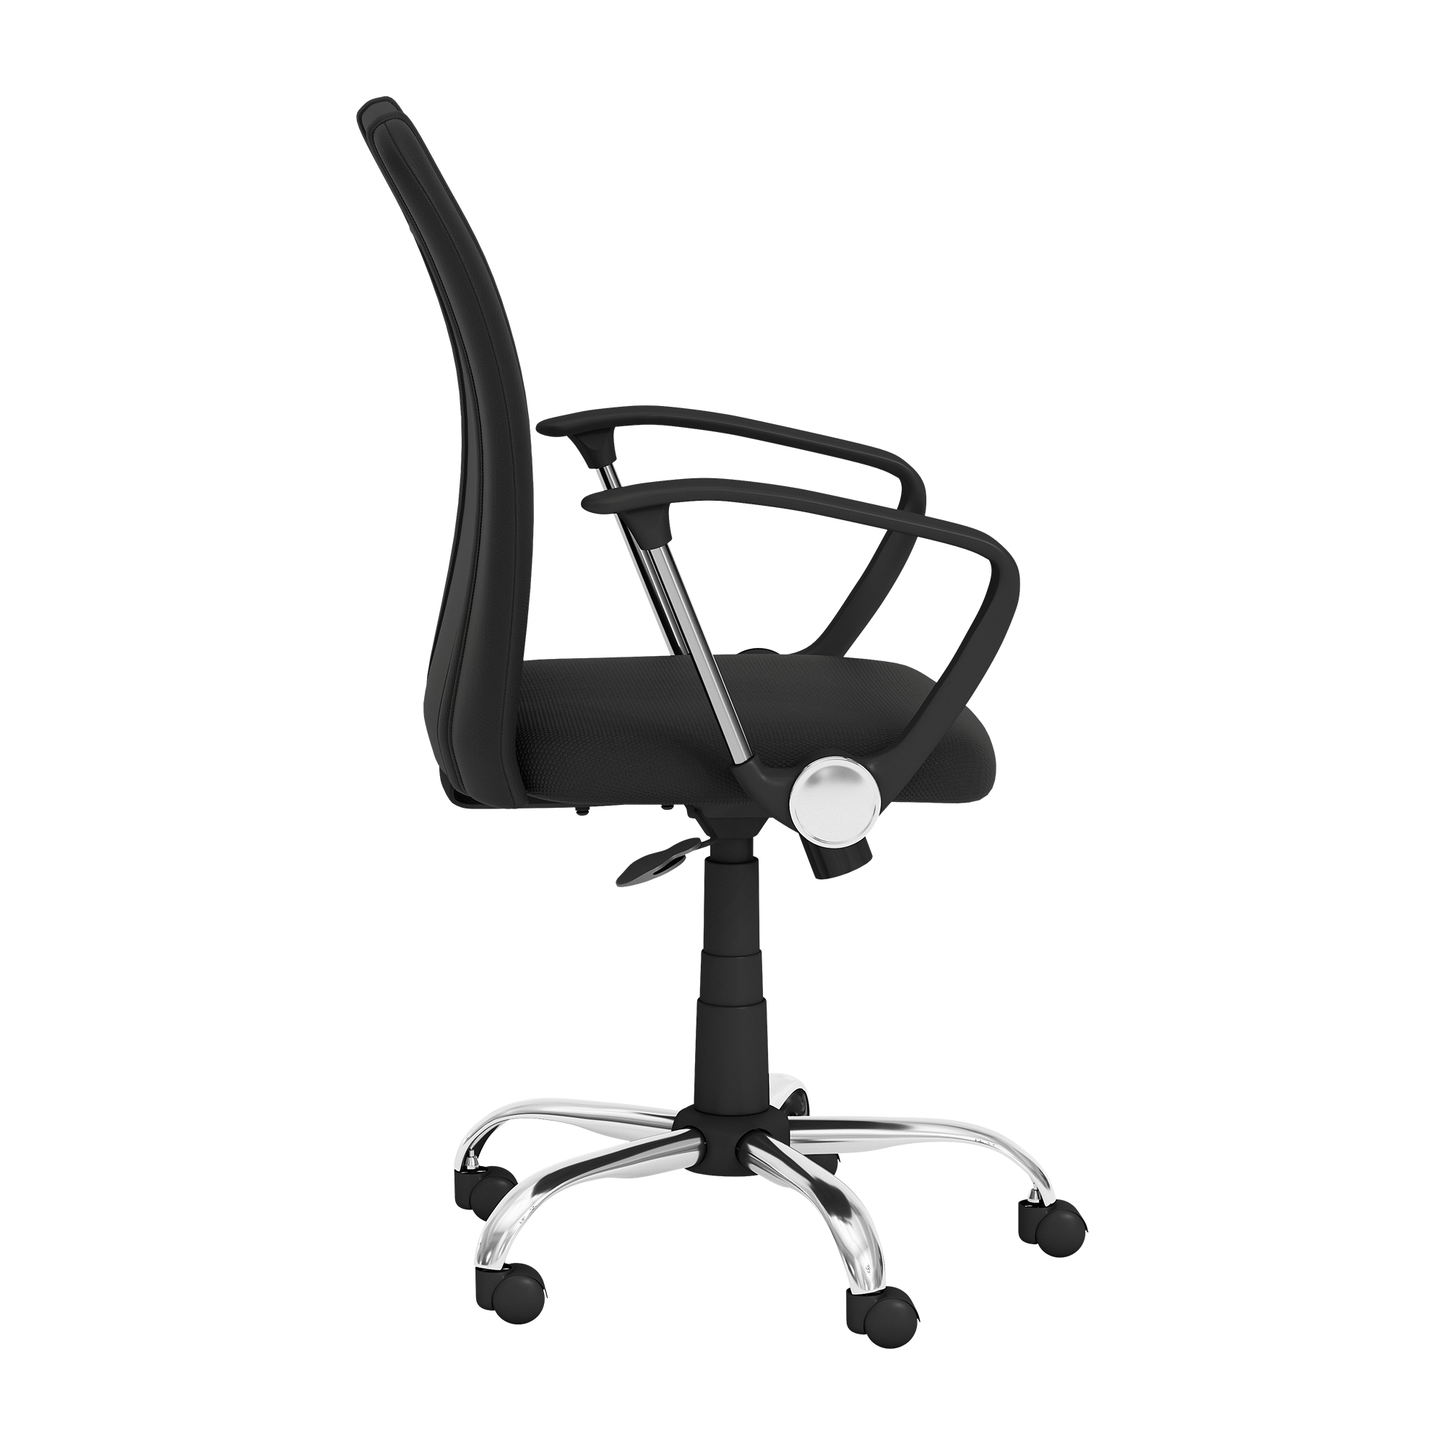 Curve Task Chair with Montreal Canadiens Logo